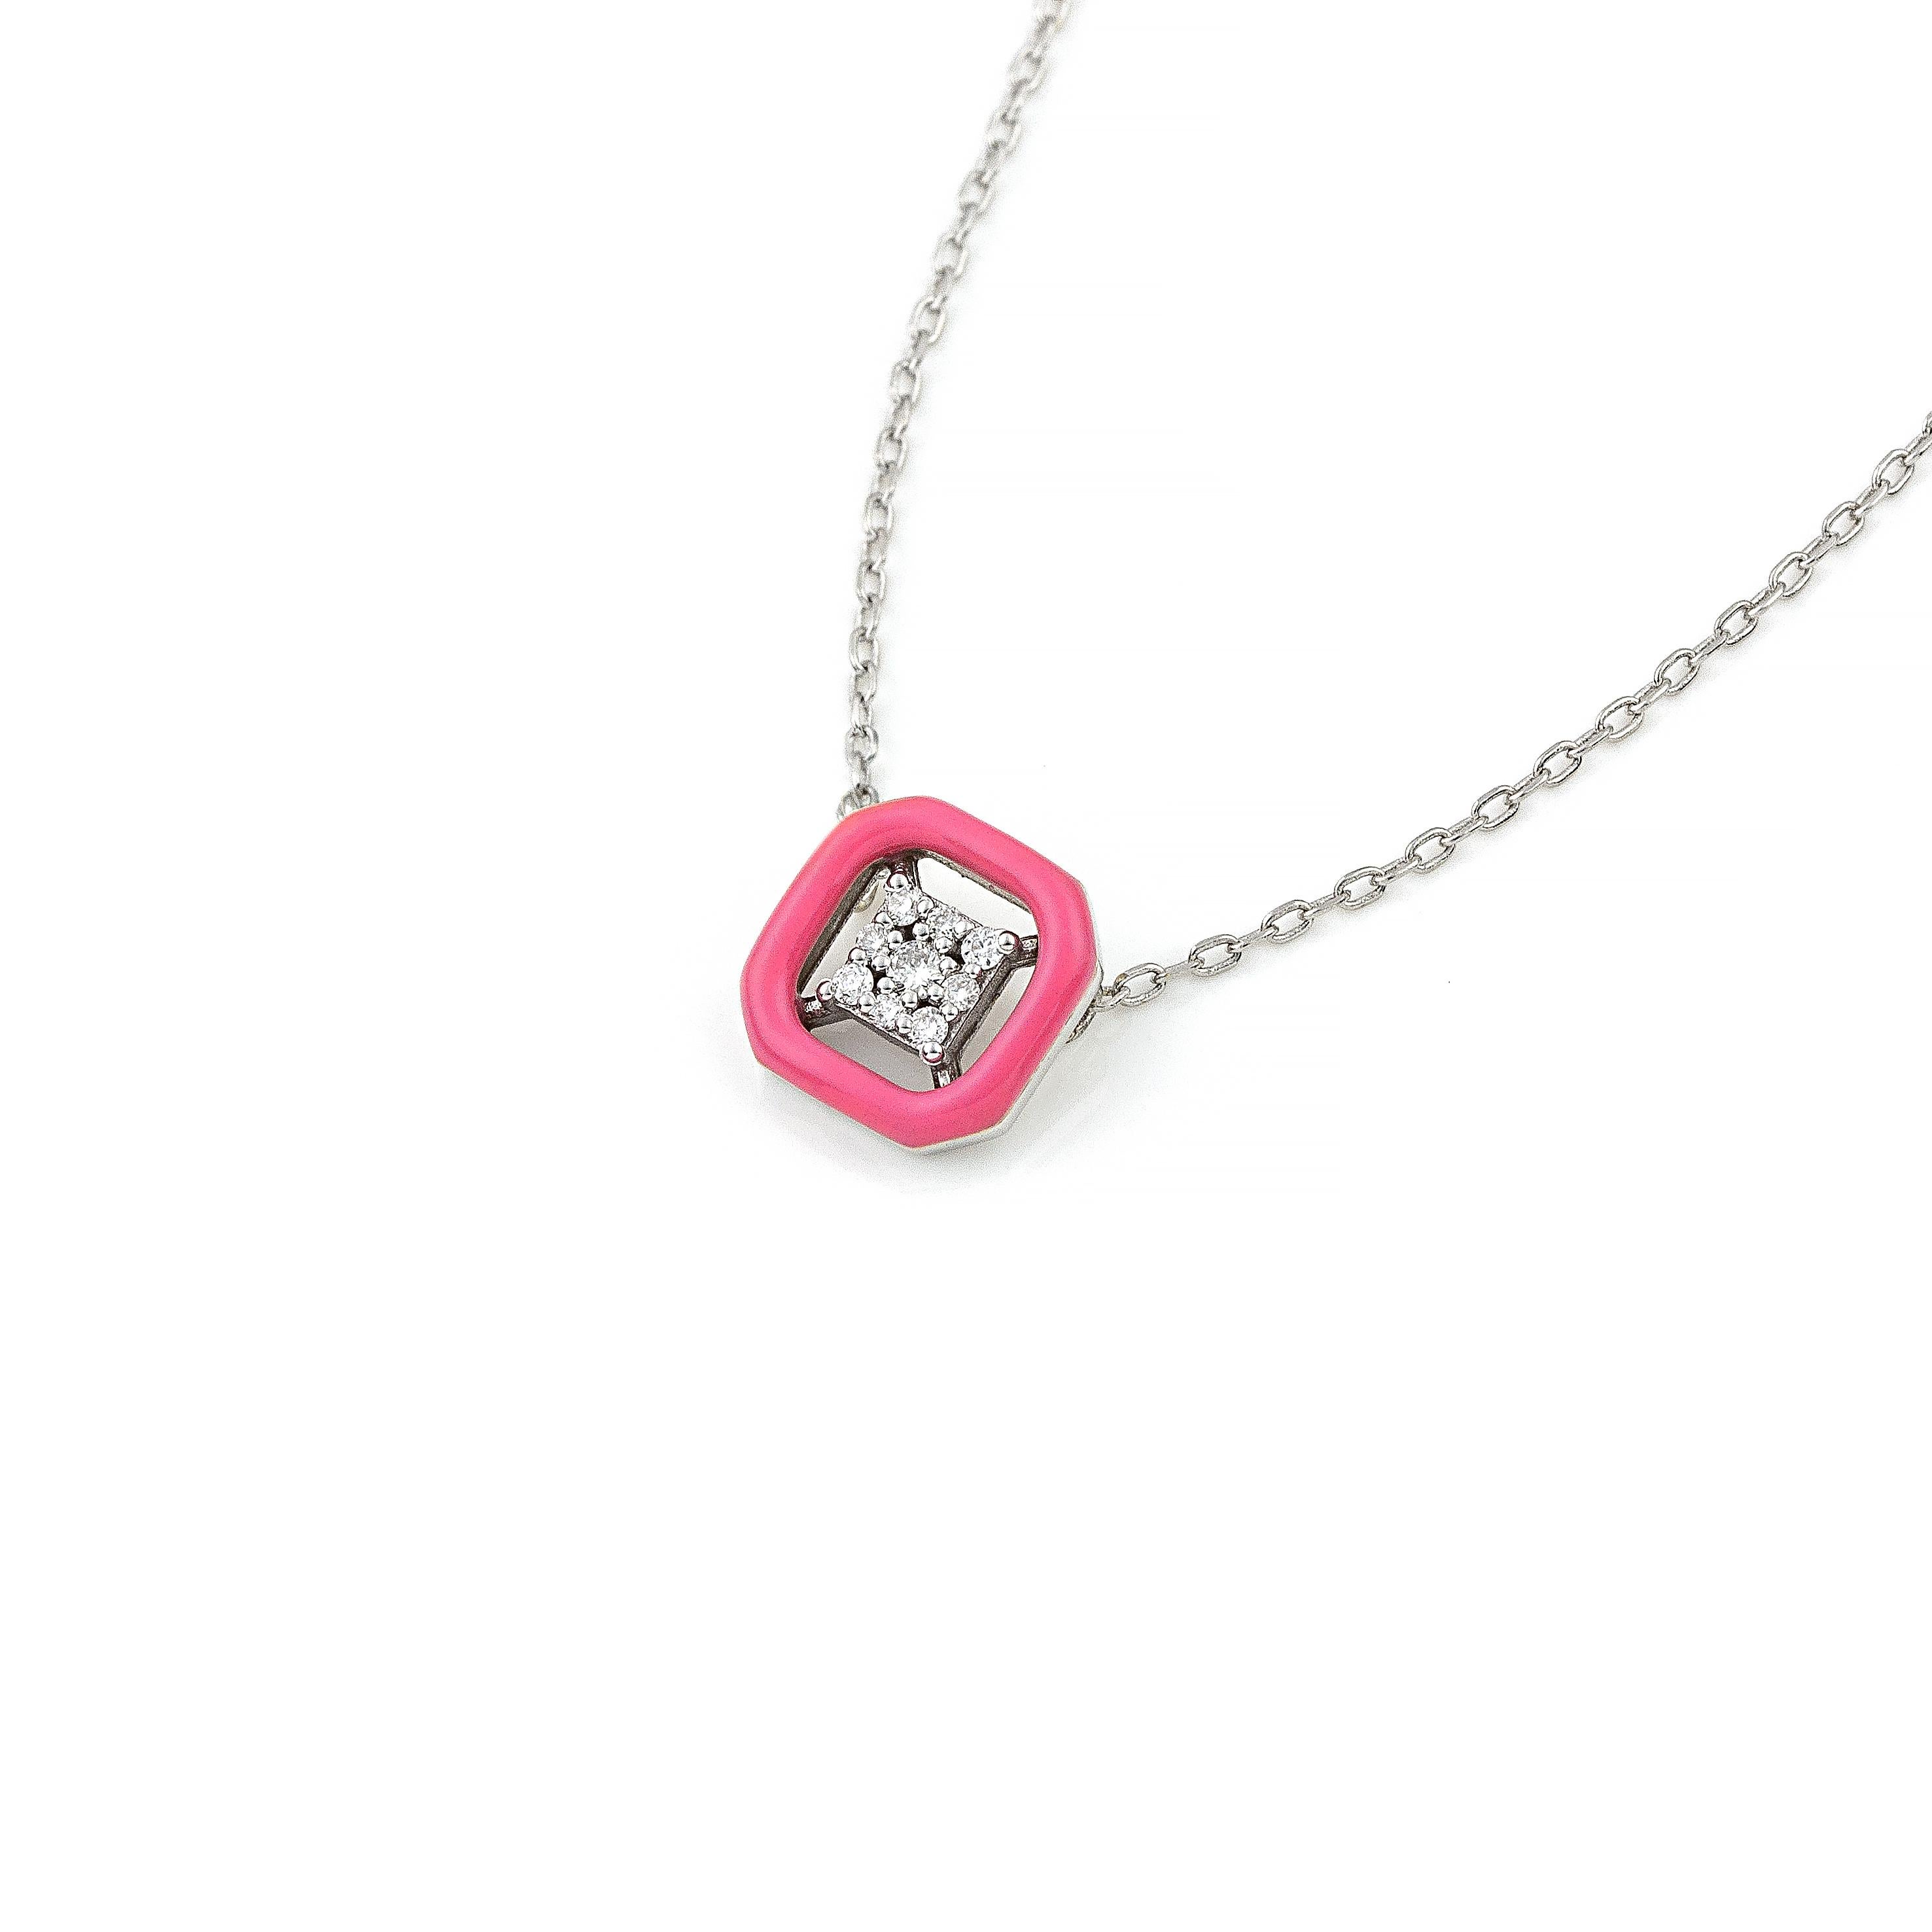 14K gold diamond pendant necklace with a happy pink colour accent, the perfect gift for yourself or a loved one.
100% Recycled 14 K White Gold
Diamonds
Pink Enamel
Size: 1.3 cm/0.51 inches
Inspiration: In the arts, maximalism, a reaction against